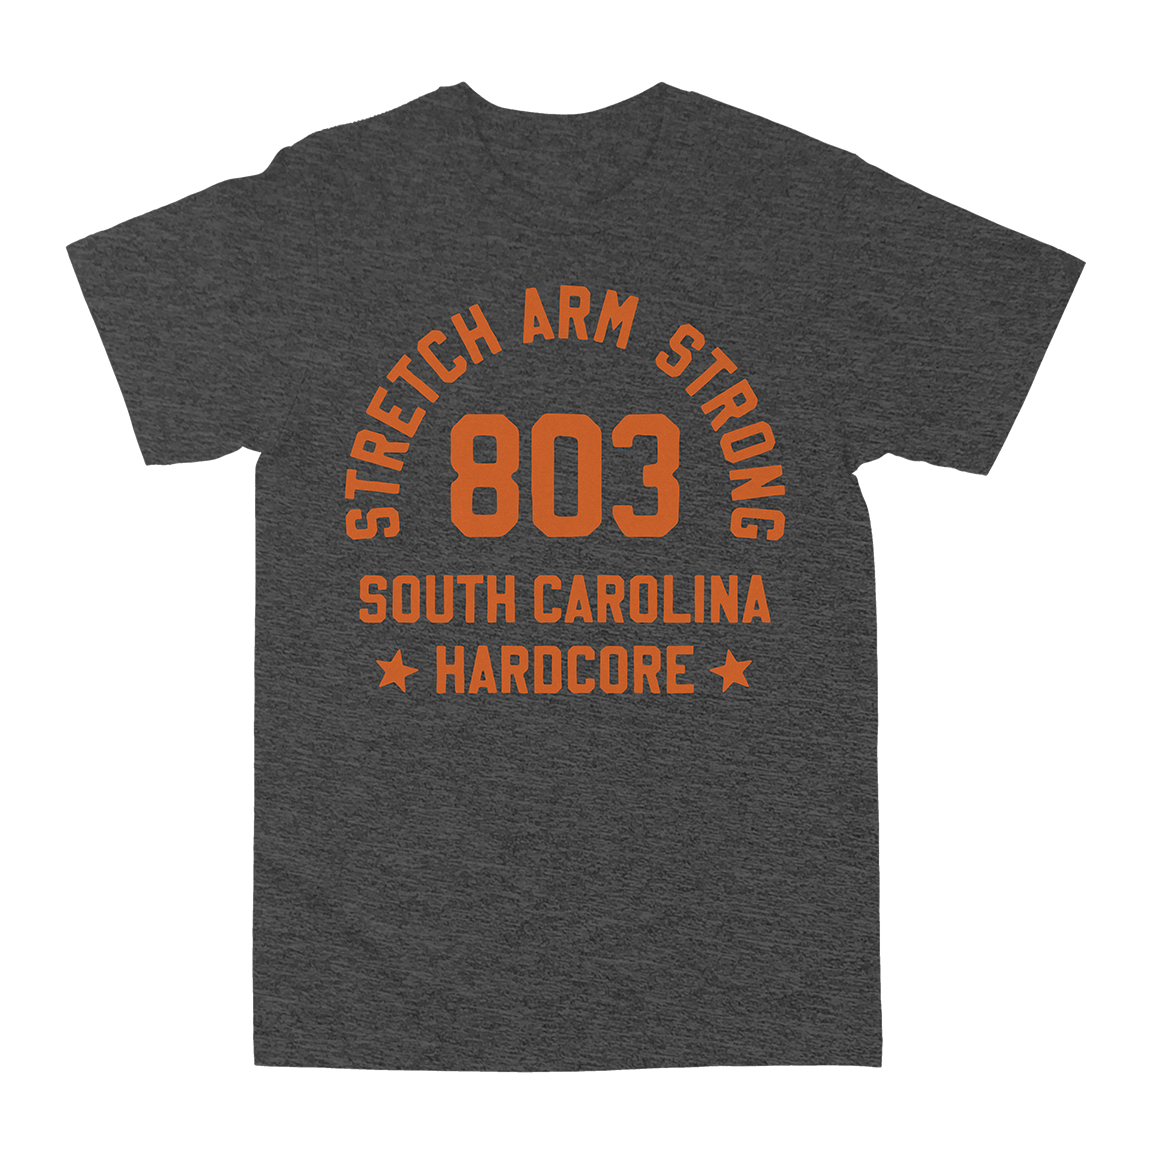 STRETCH ARM STRONG "Golden Age" Heather Charcoal T-Shirt